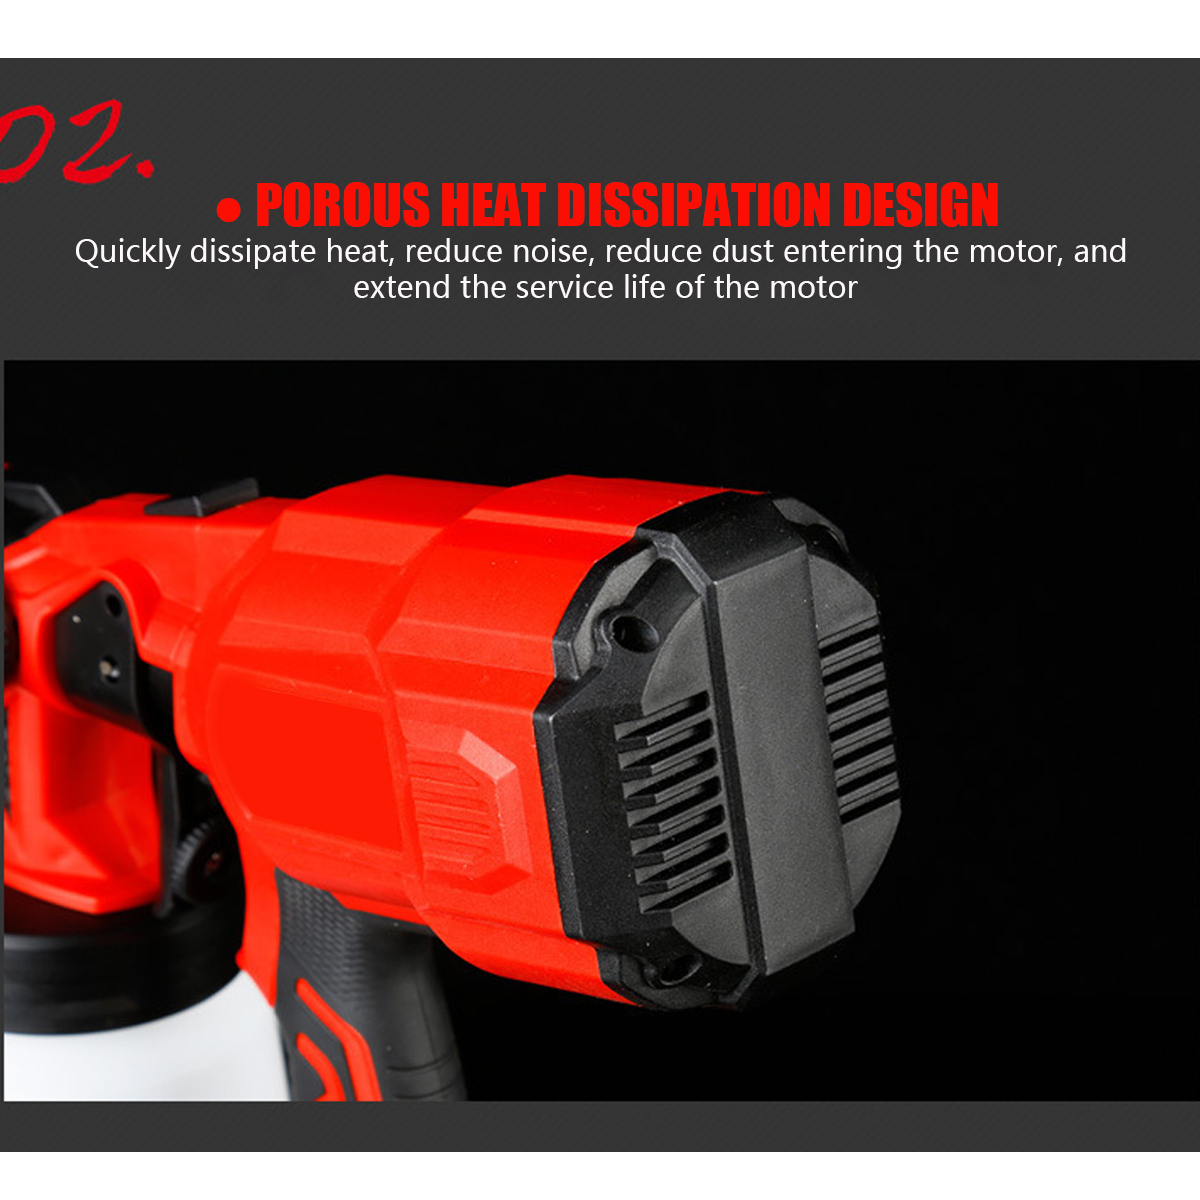 Removable-Electric-Paint-Spray-Guns-High-Pressure-Gravity-Feed-Kit-Speed-Regulator-Paint-Tools-Prime-1873508-6